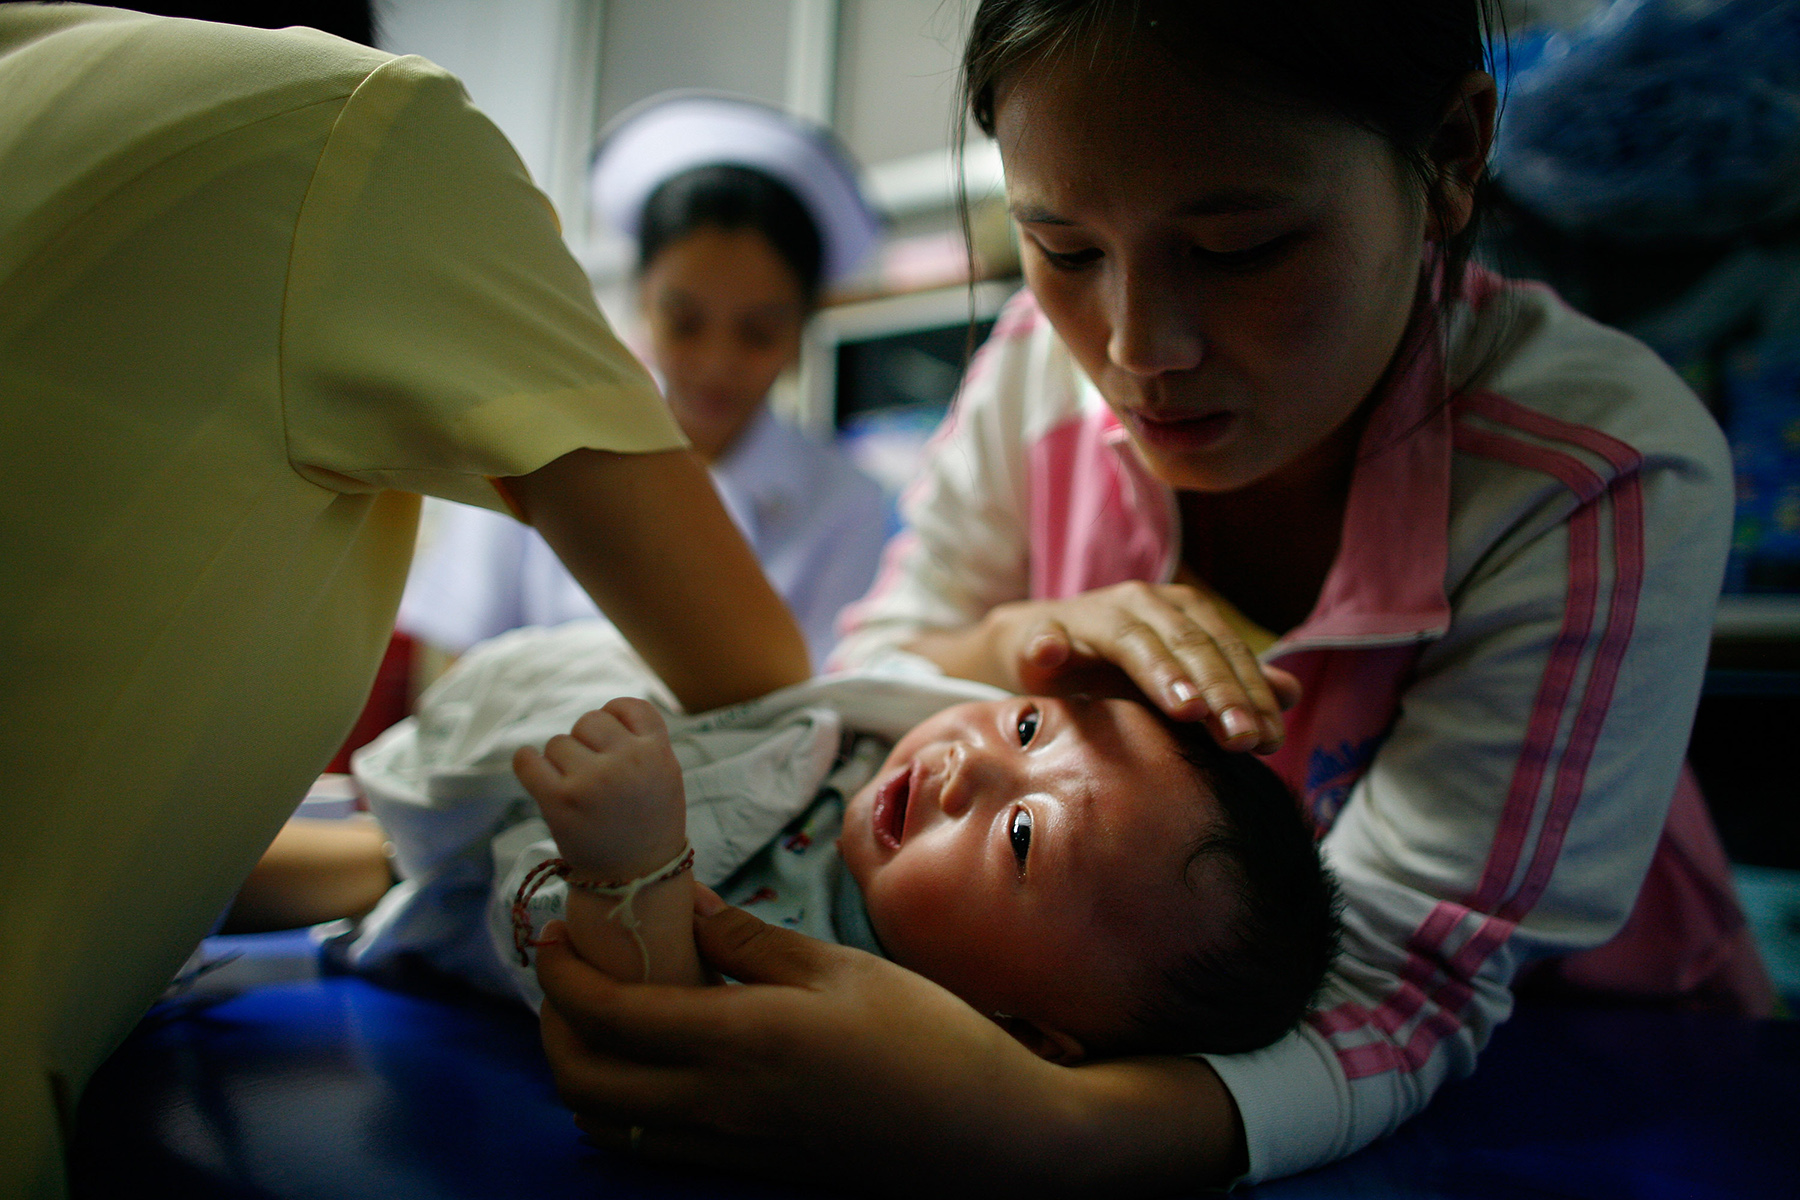 Mother holds her crying baby while the doctor or nurse does a health check, children's healthcare in Thailand
Photo: Paula Bronstein/Getty Images